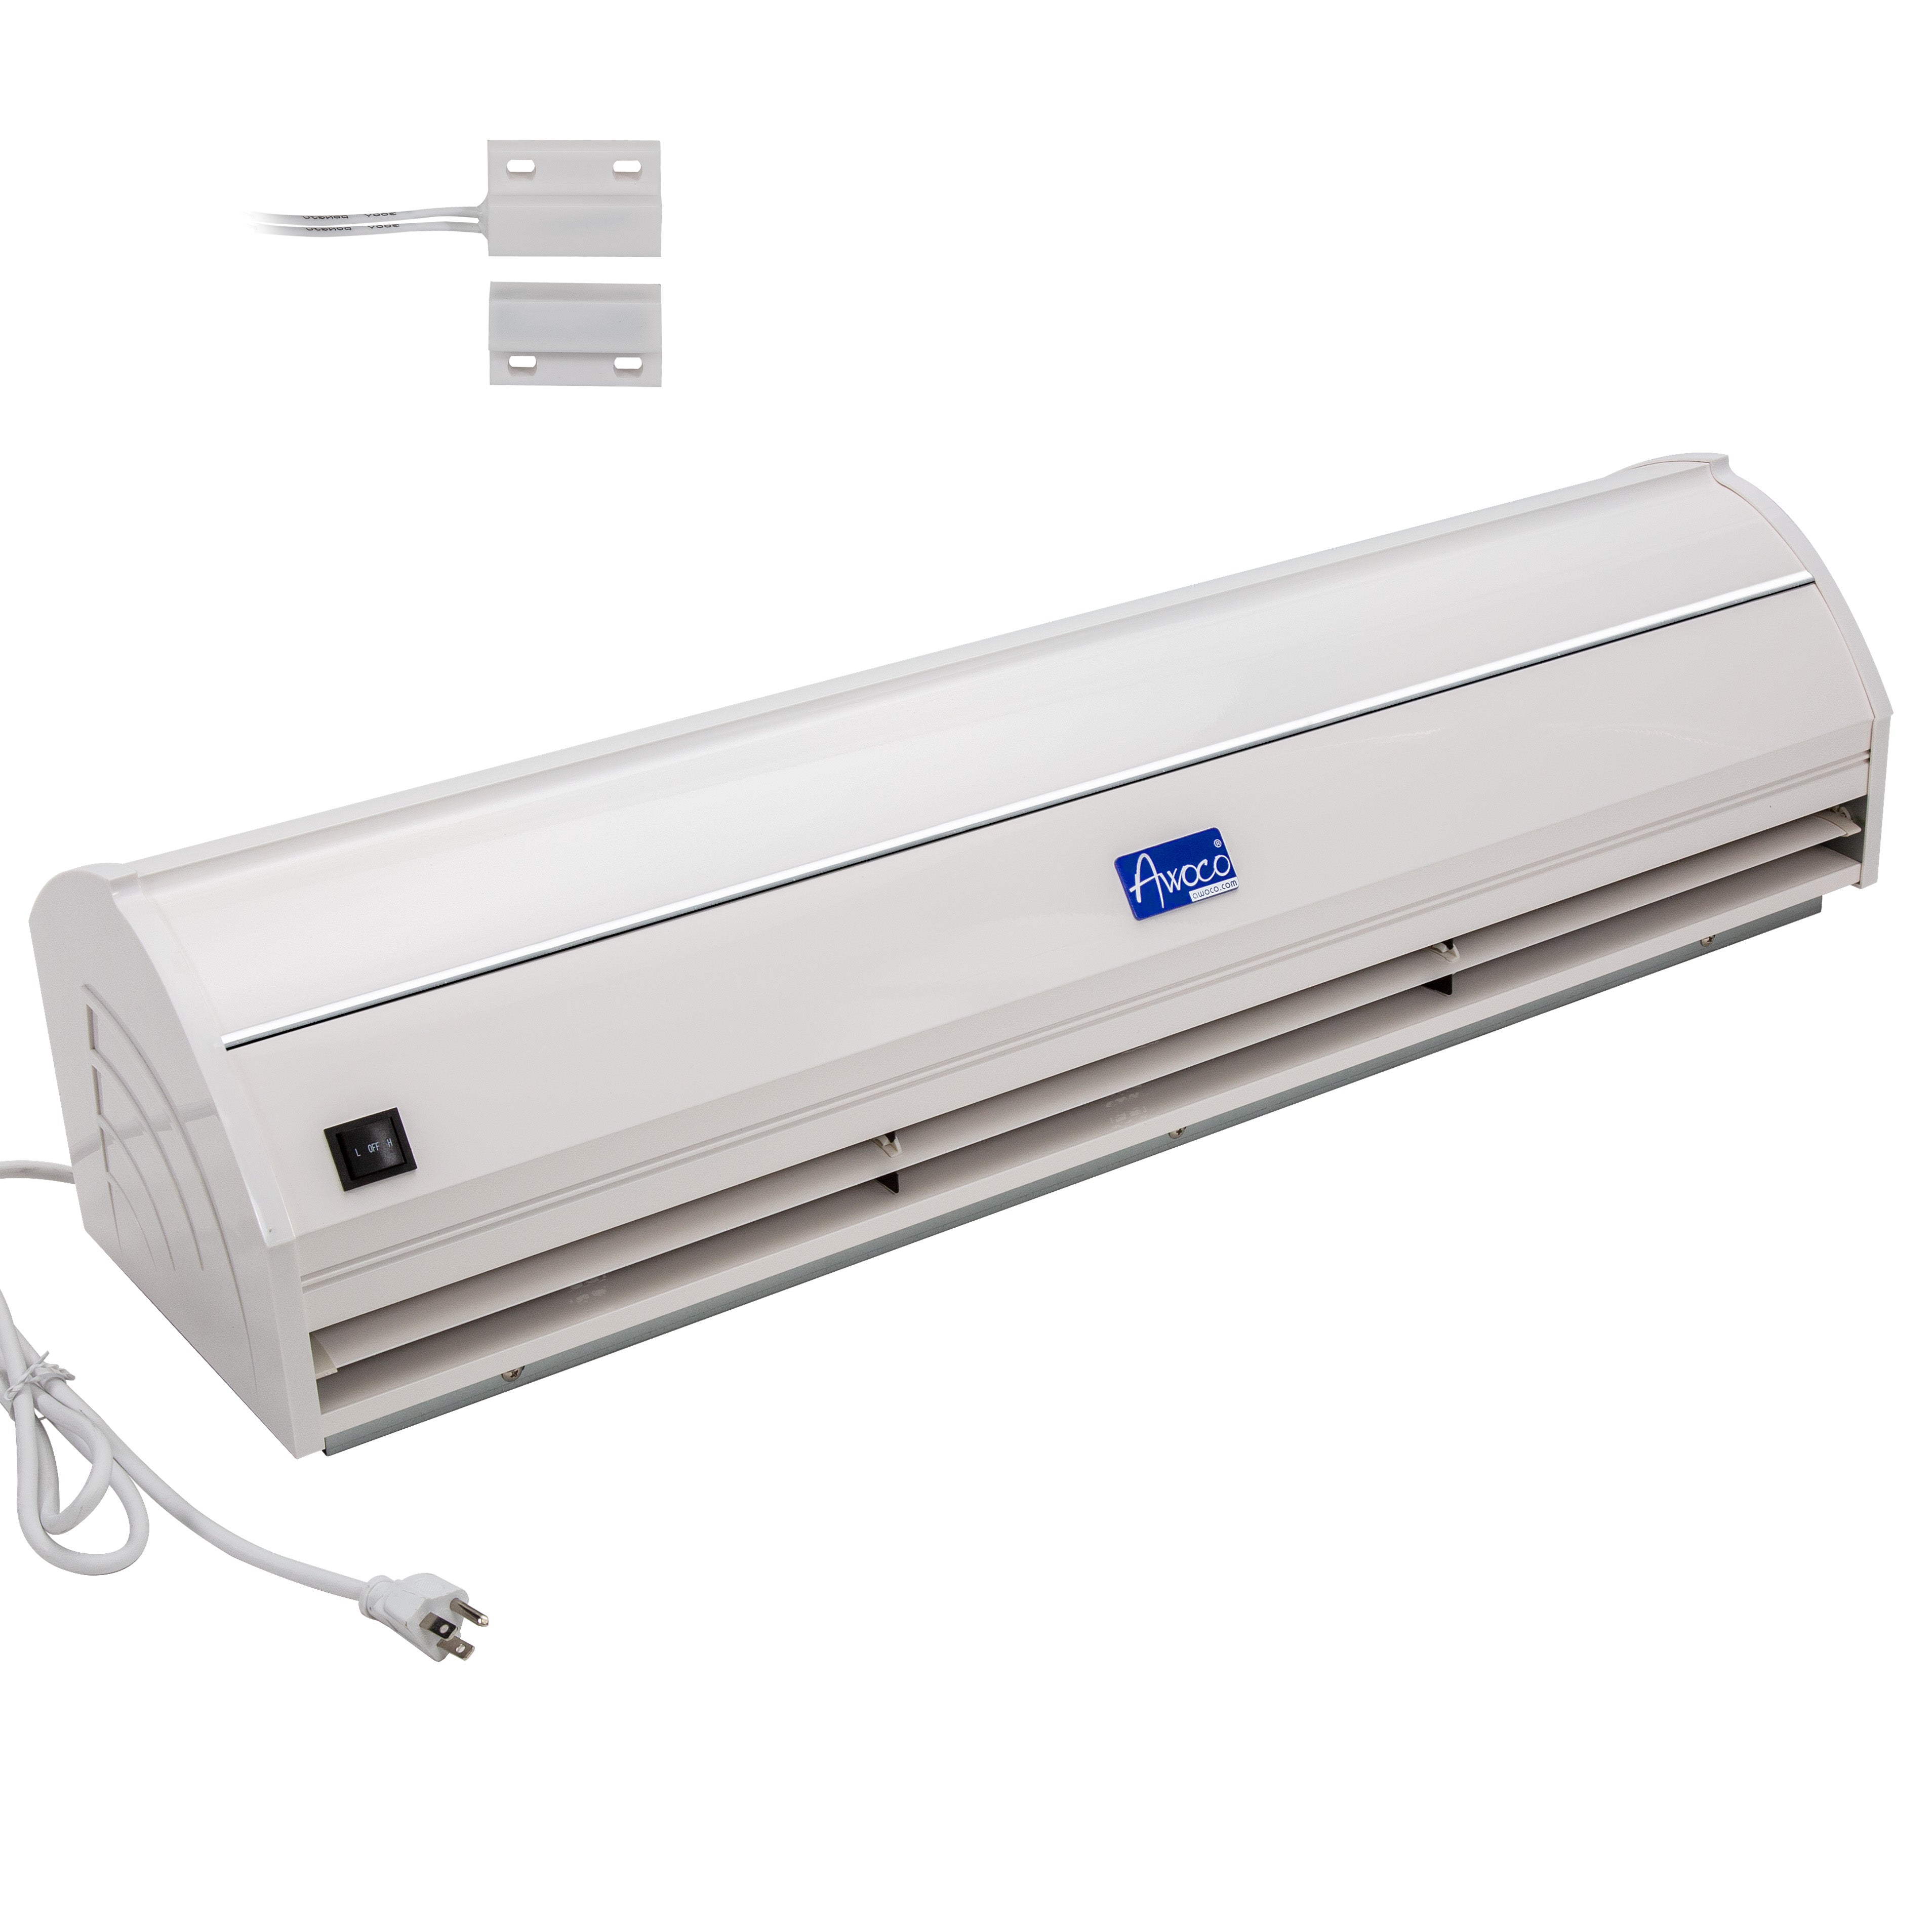 Awoco 72" Elegant 2 Speeds 1800 CFM Air Curtain, CE Certified, 120V Unheated with Magnetic Shutoff Delay Swing Doors